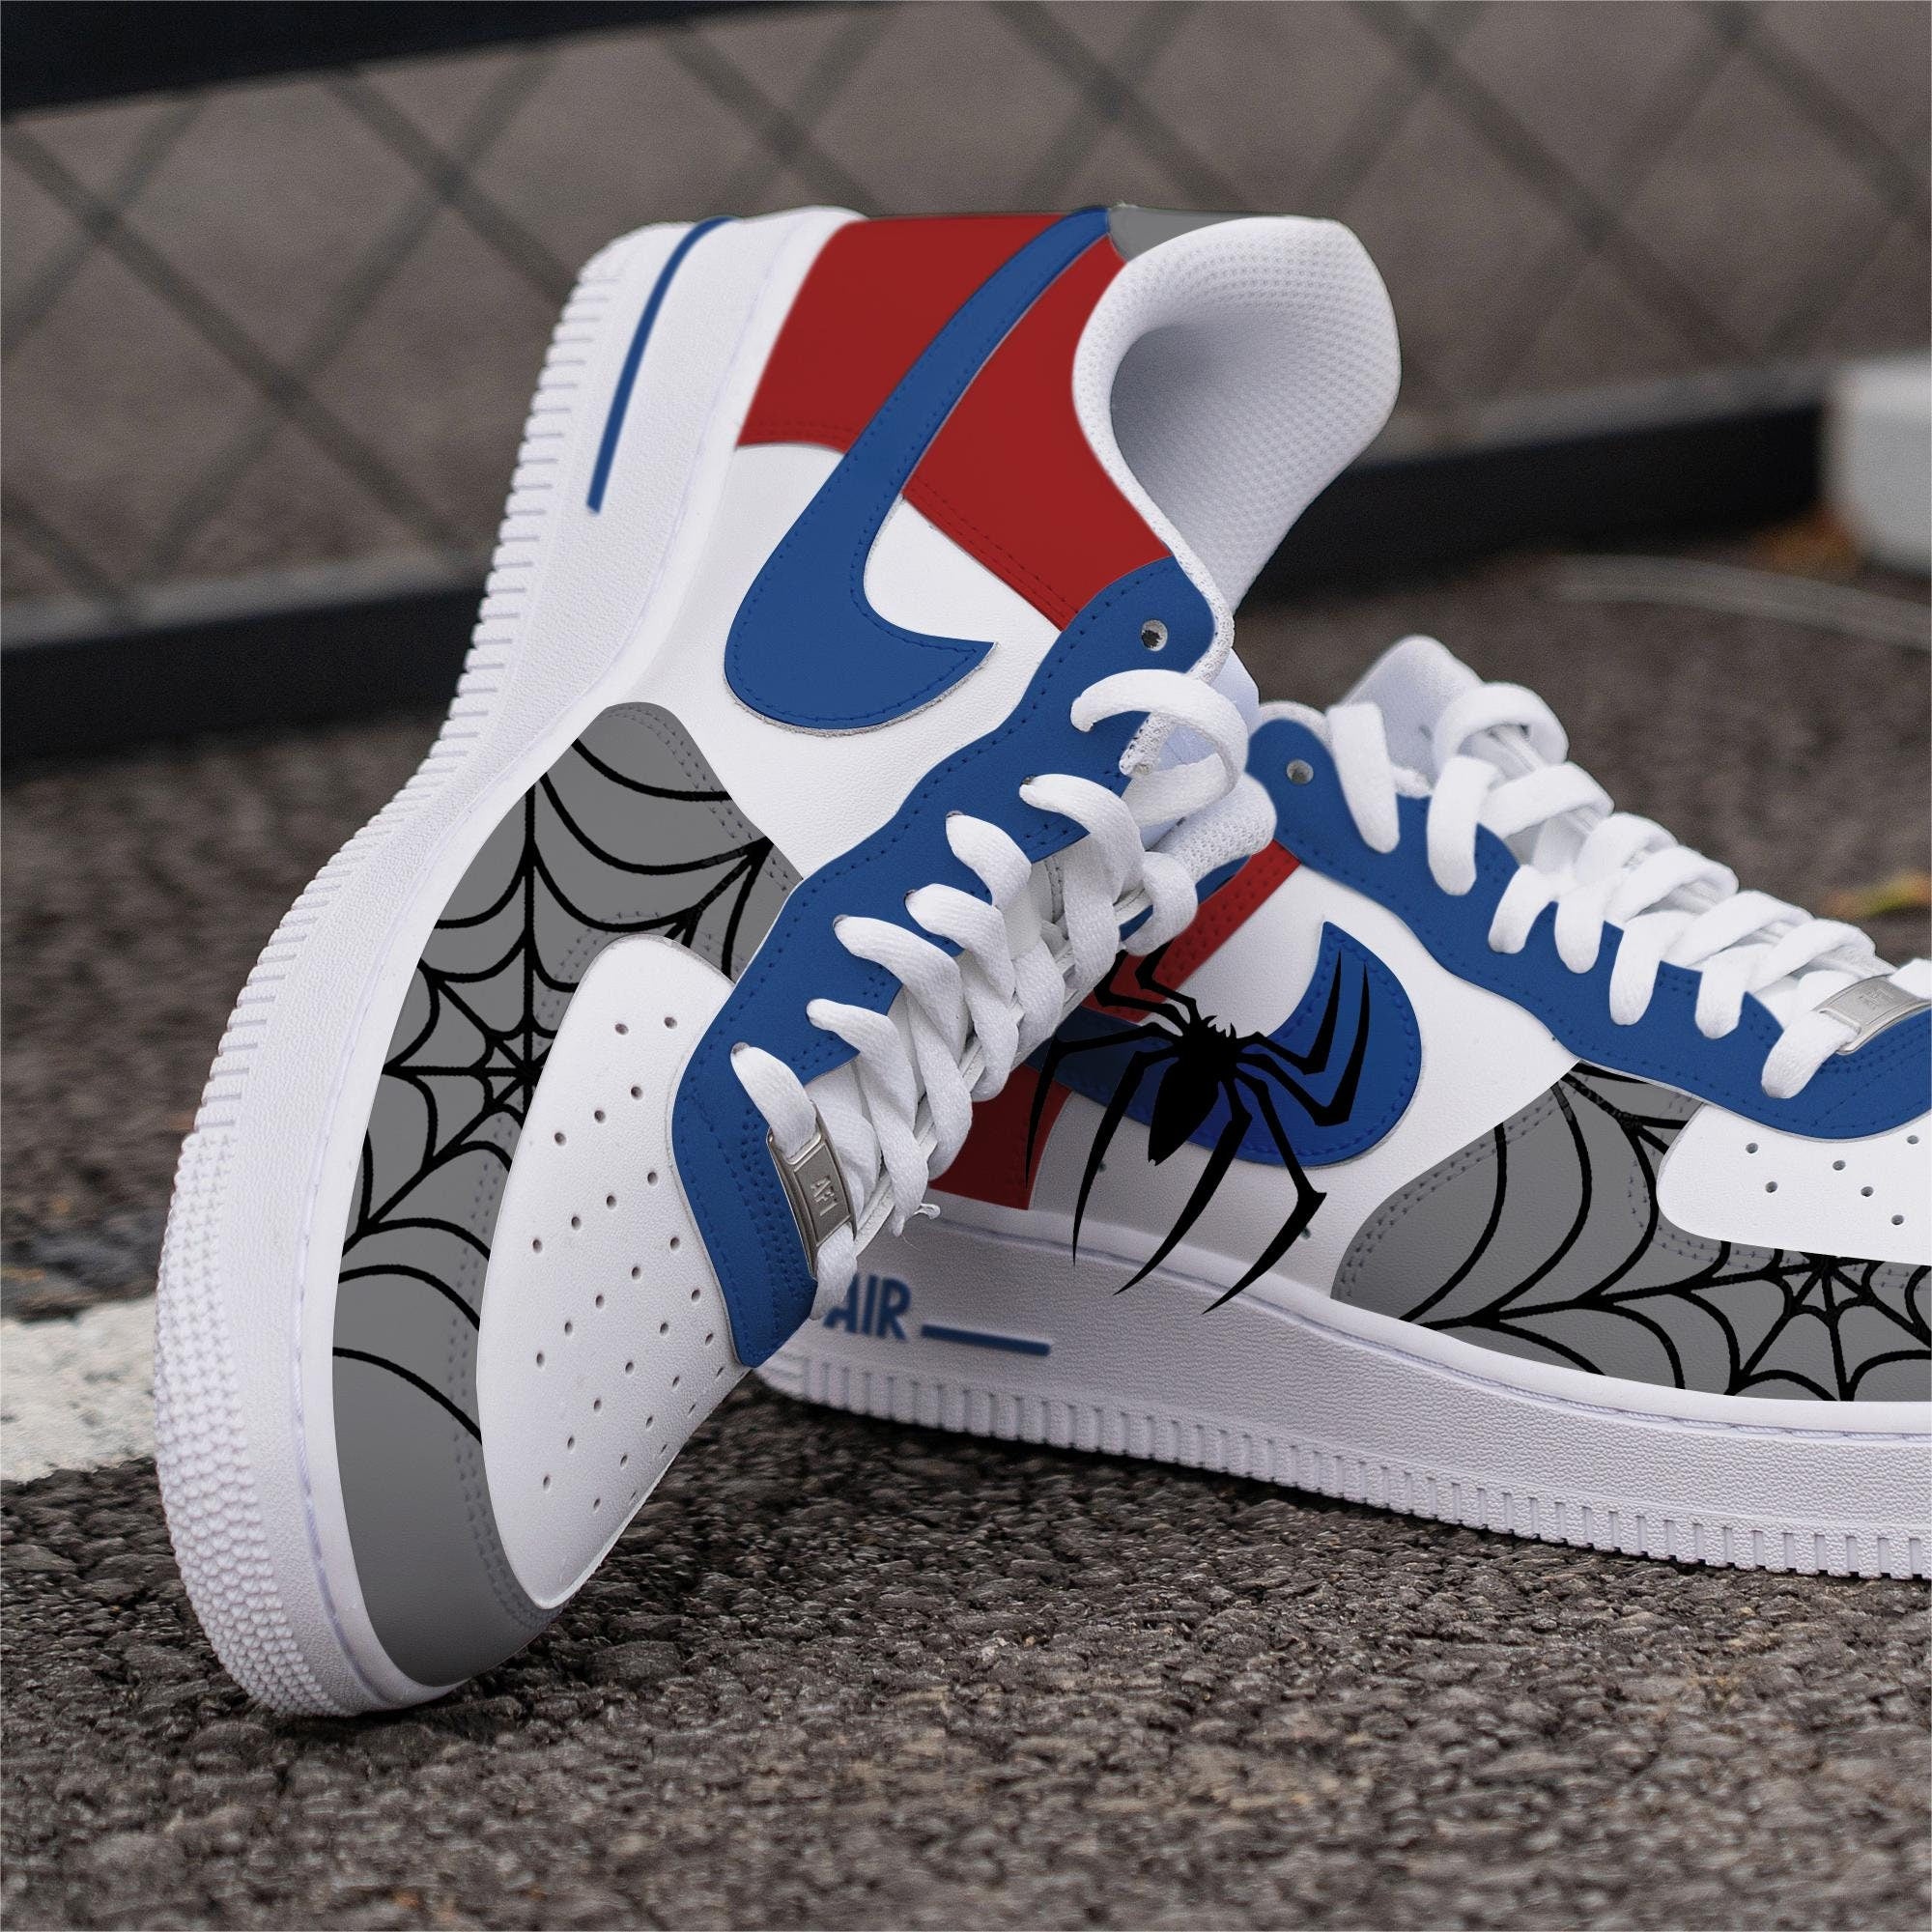 Custom Spider Nike Air Force 1 Shoes